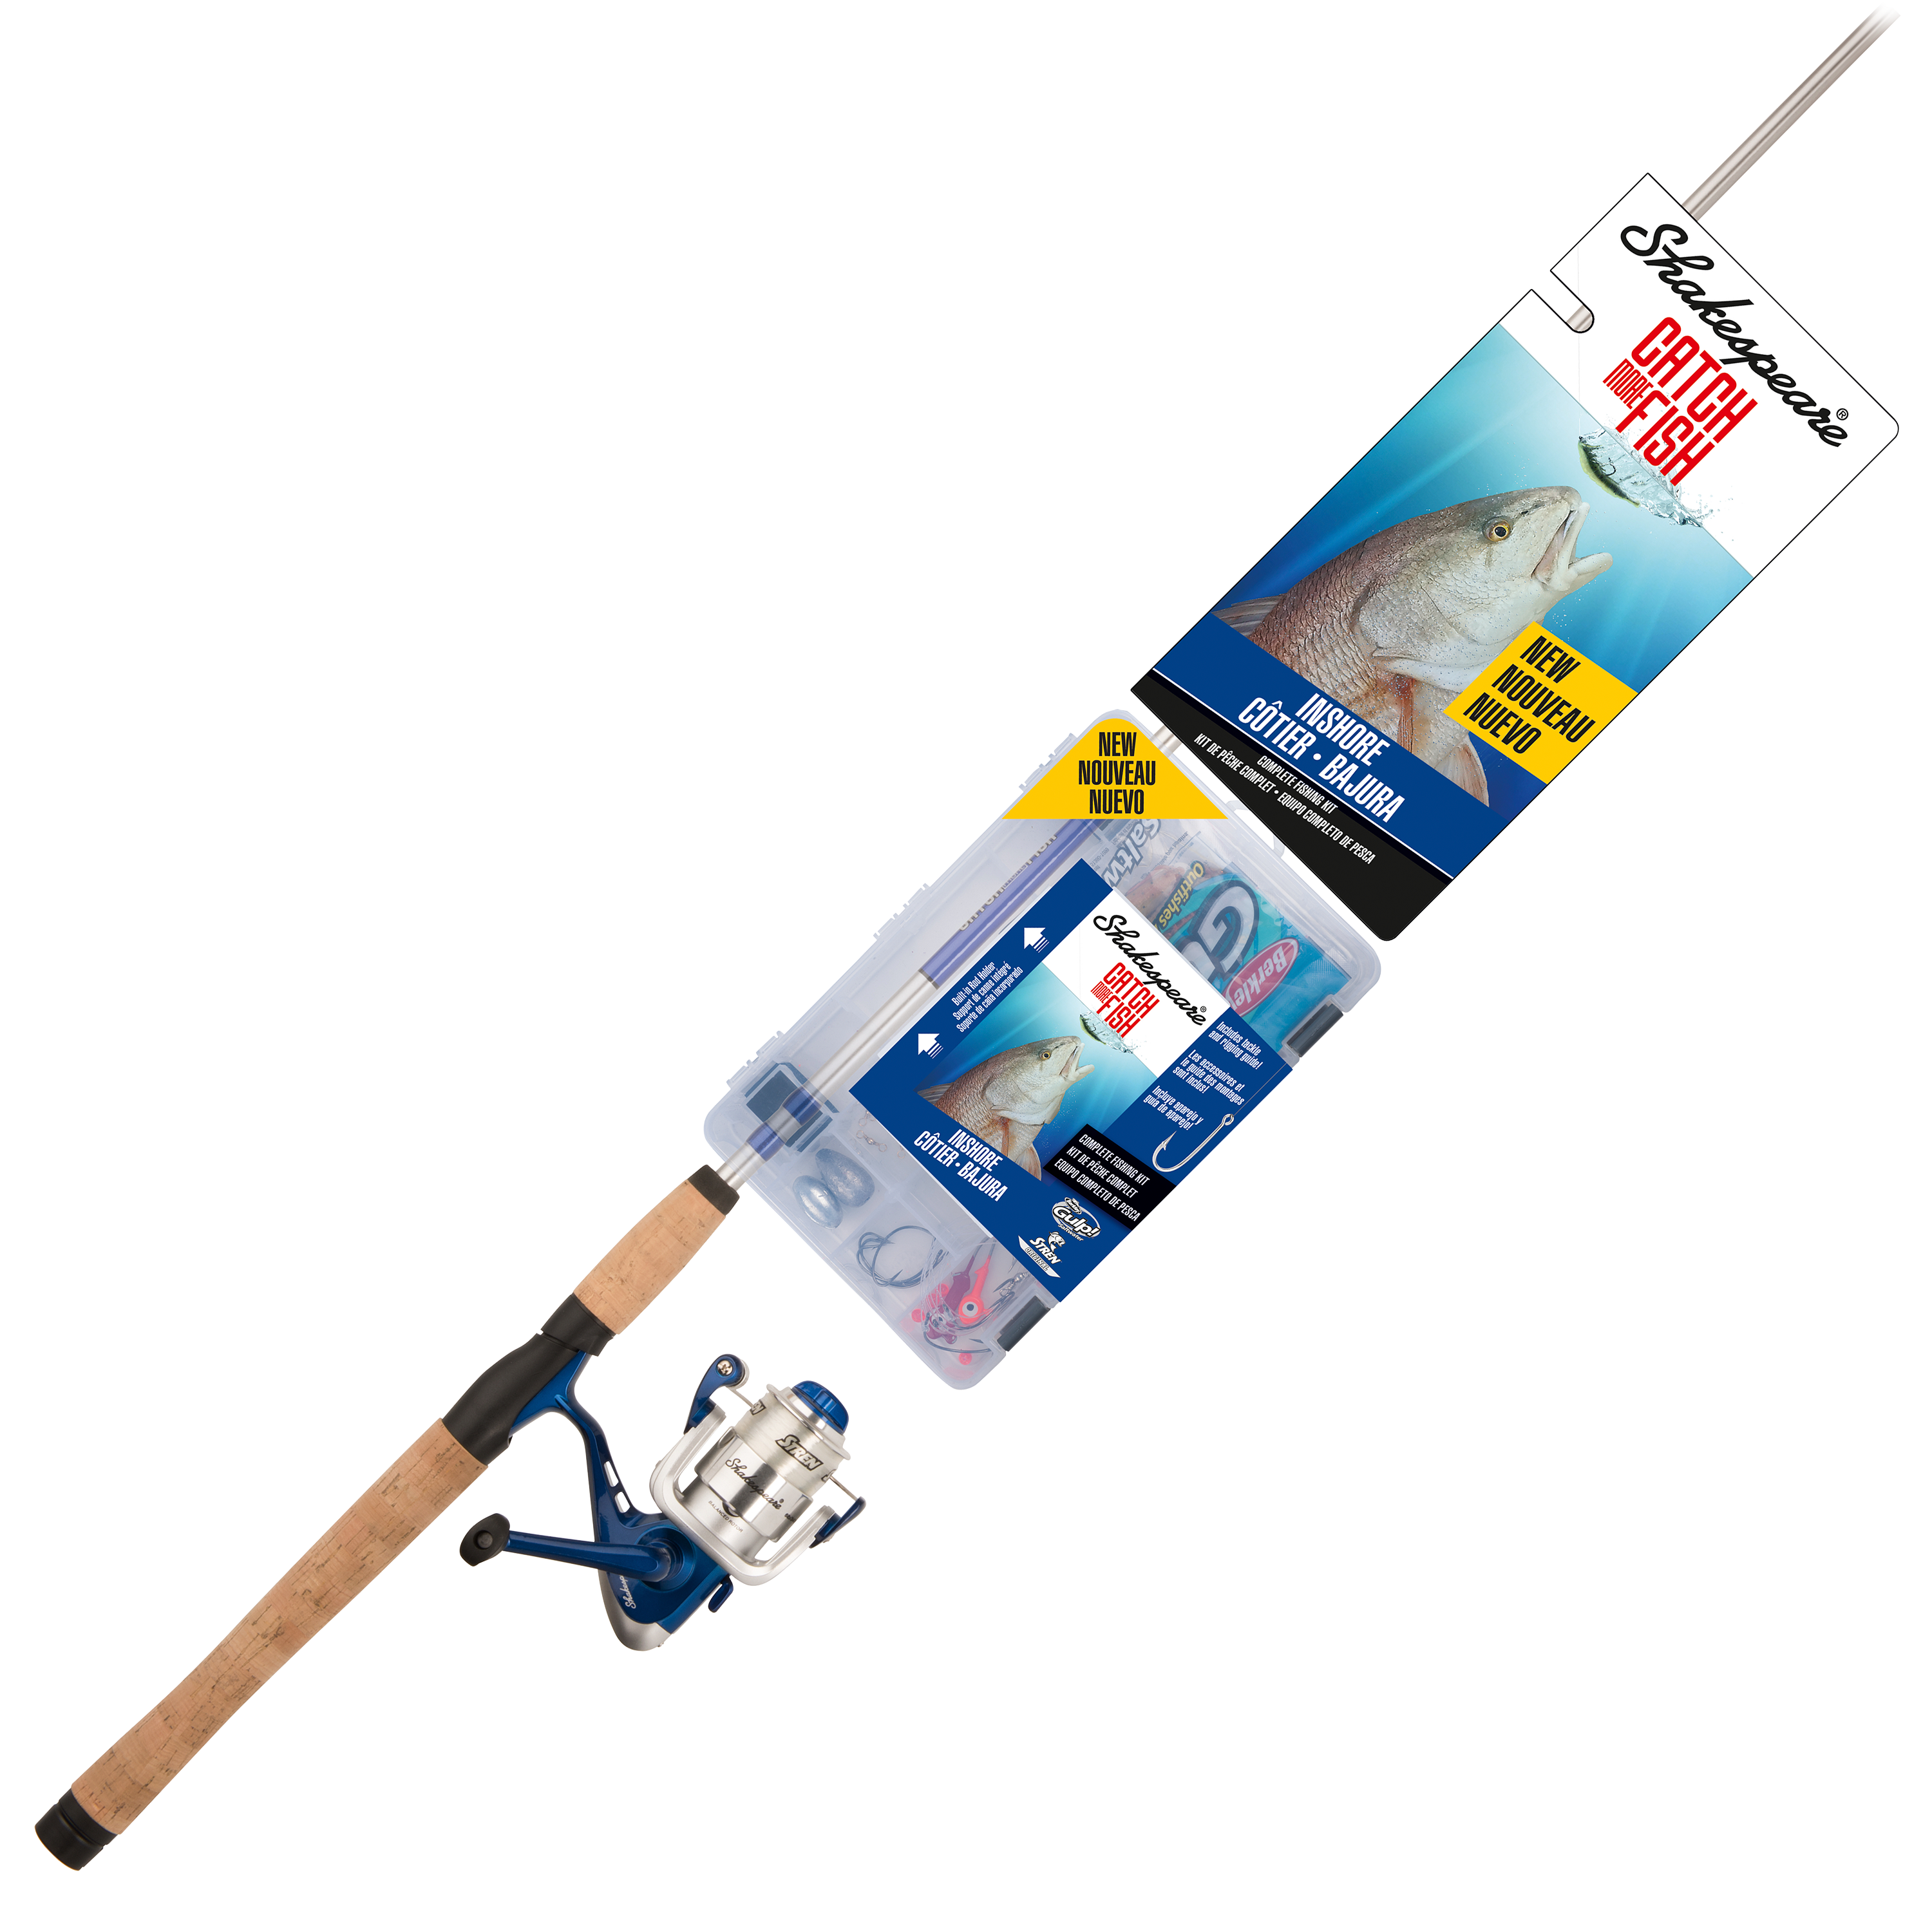 Shakespeare Catch More Fish Spinning Reel and Fishing Rod Combo, 7